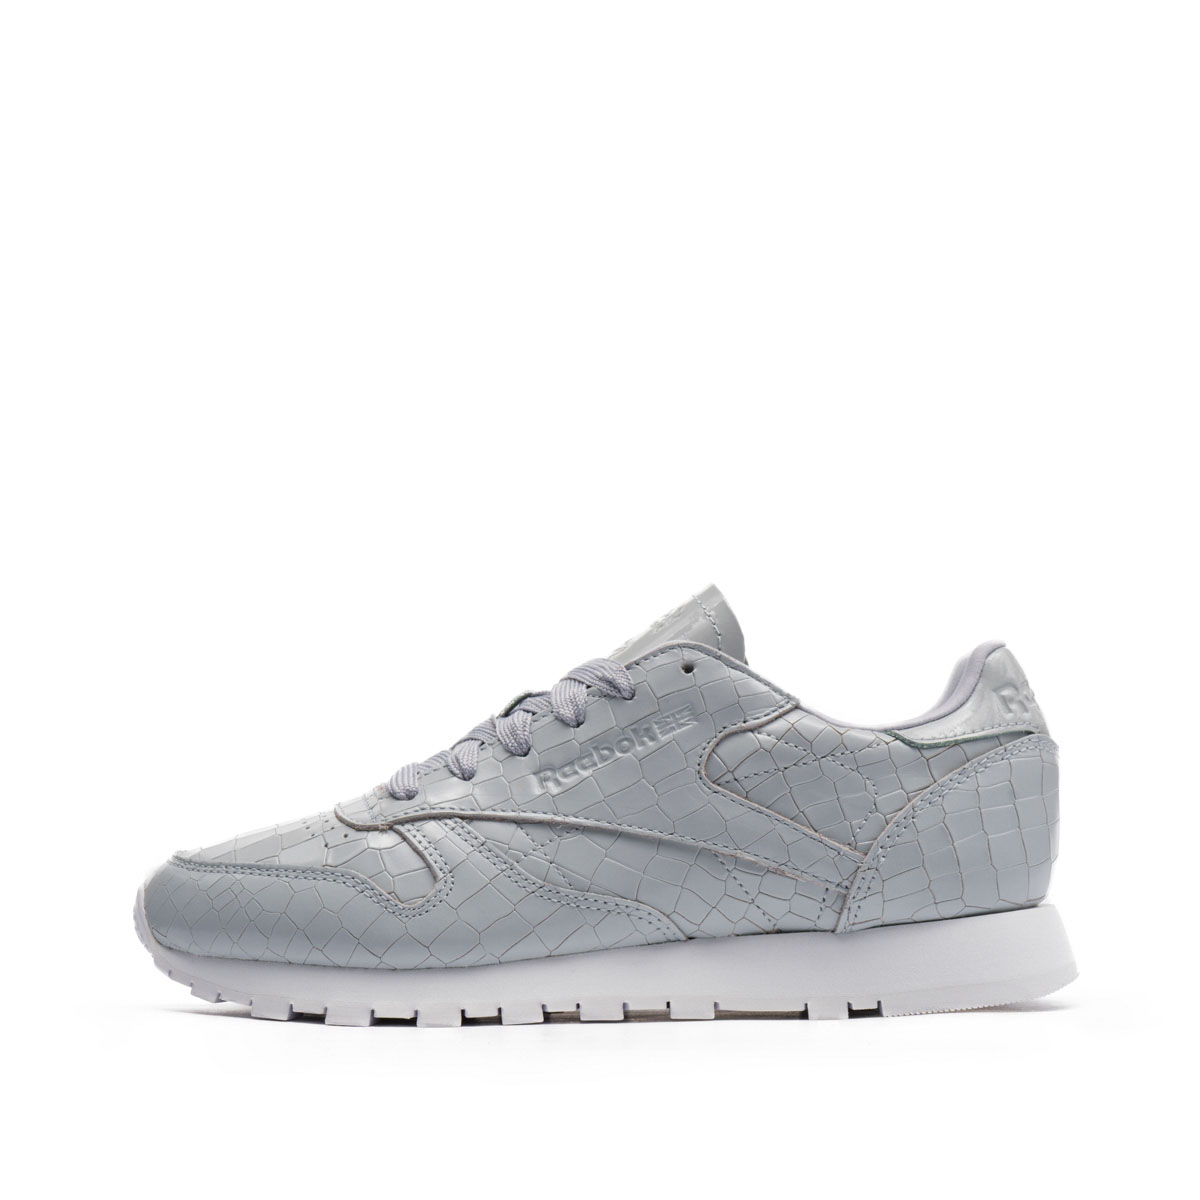 Reebok CL Leather Crackle  BS9869